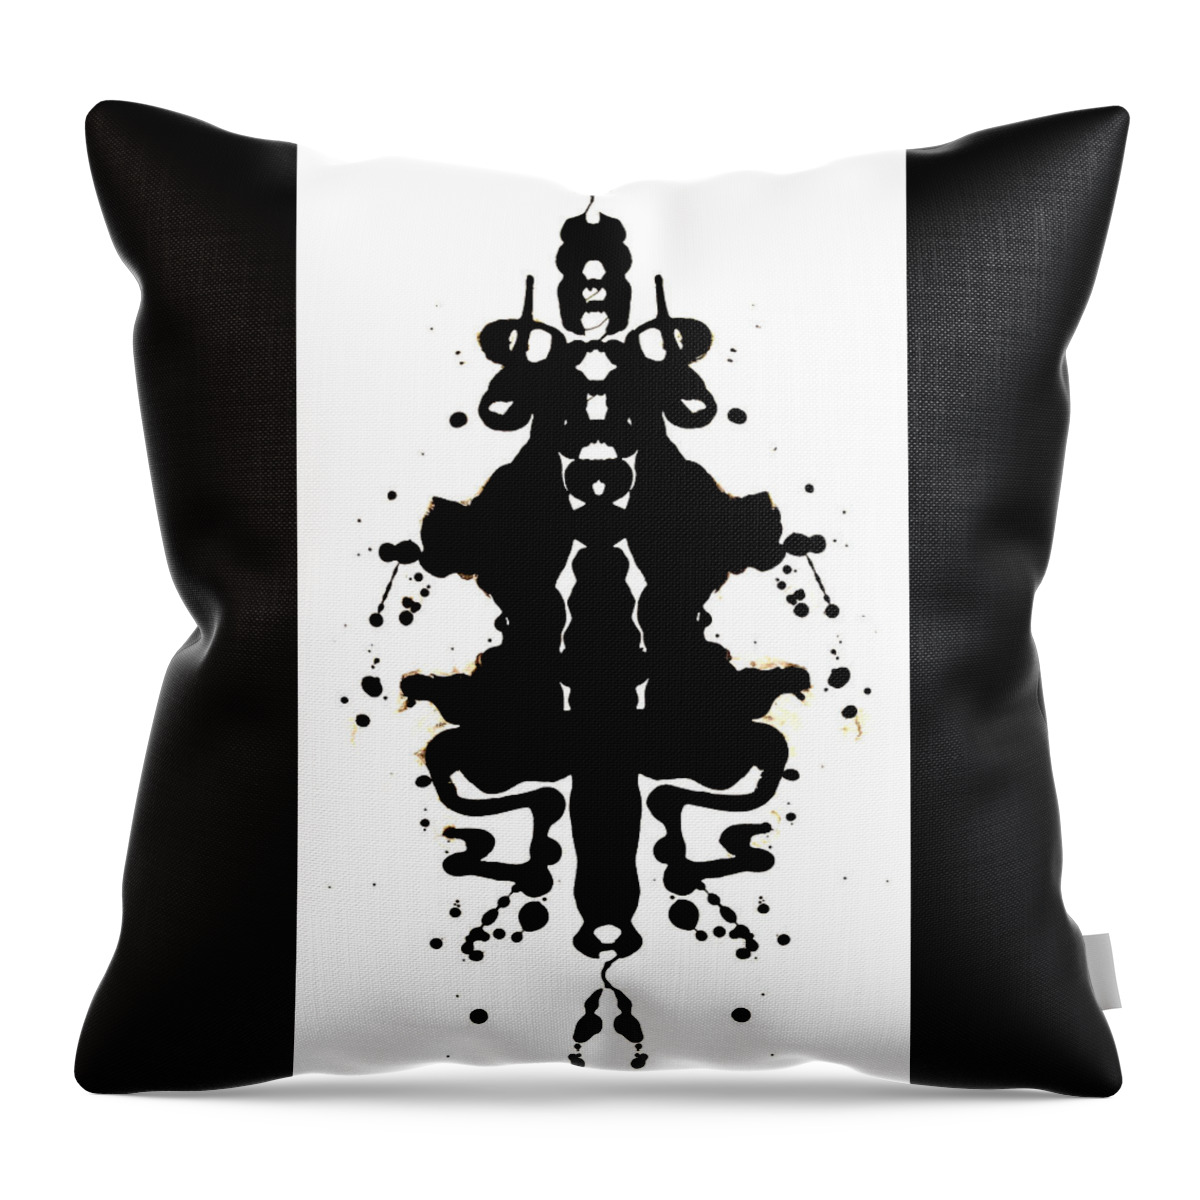 Statement Throw Pillow featuring the painting Two Finger Salute by Stephenie Zagorski